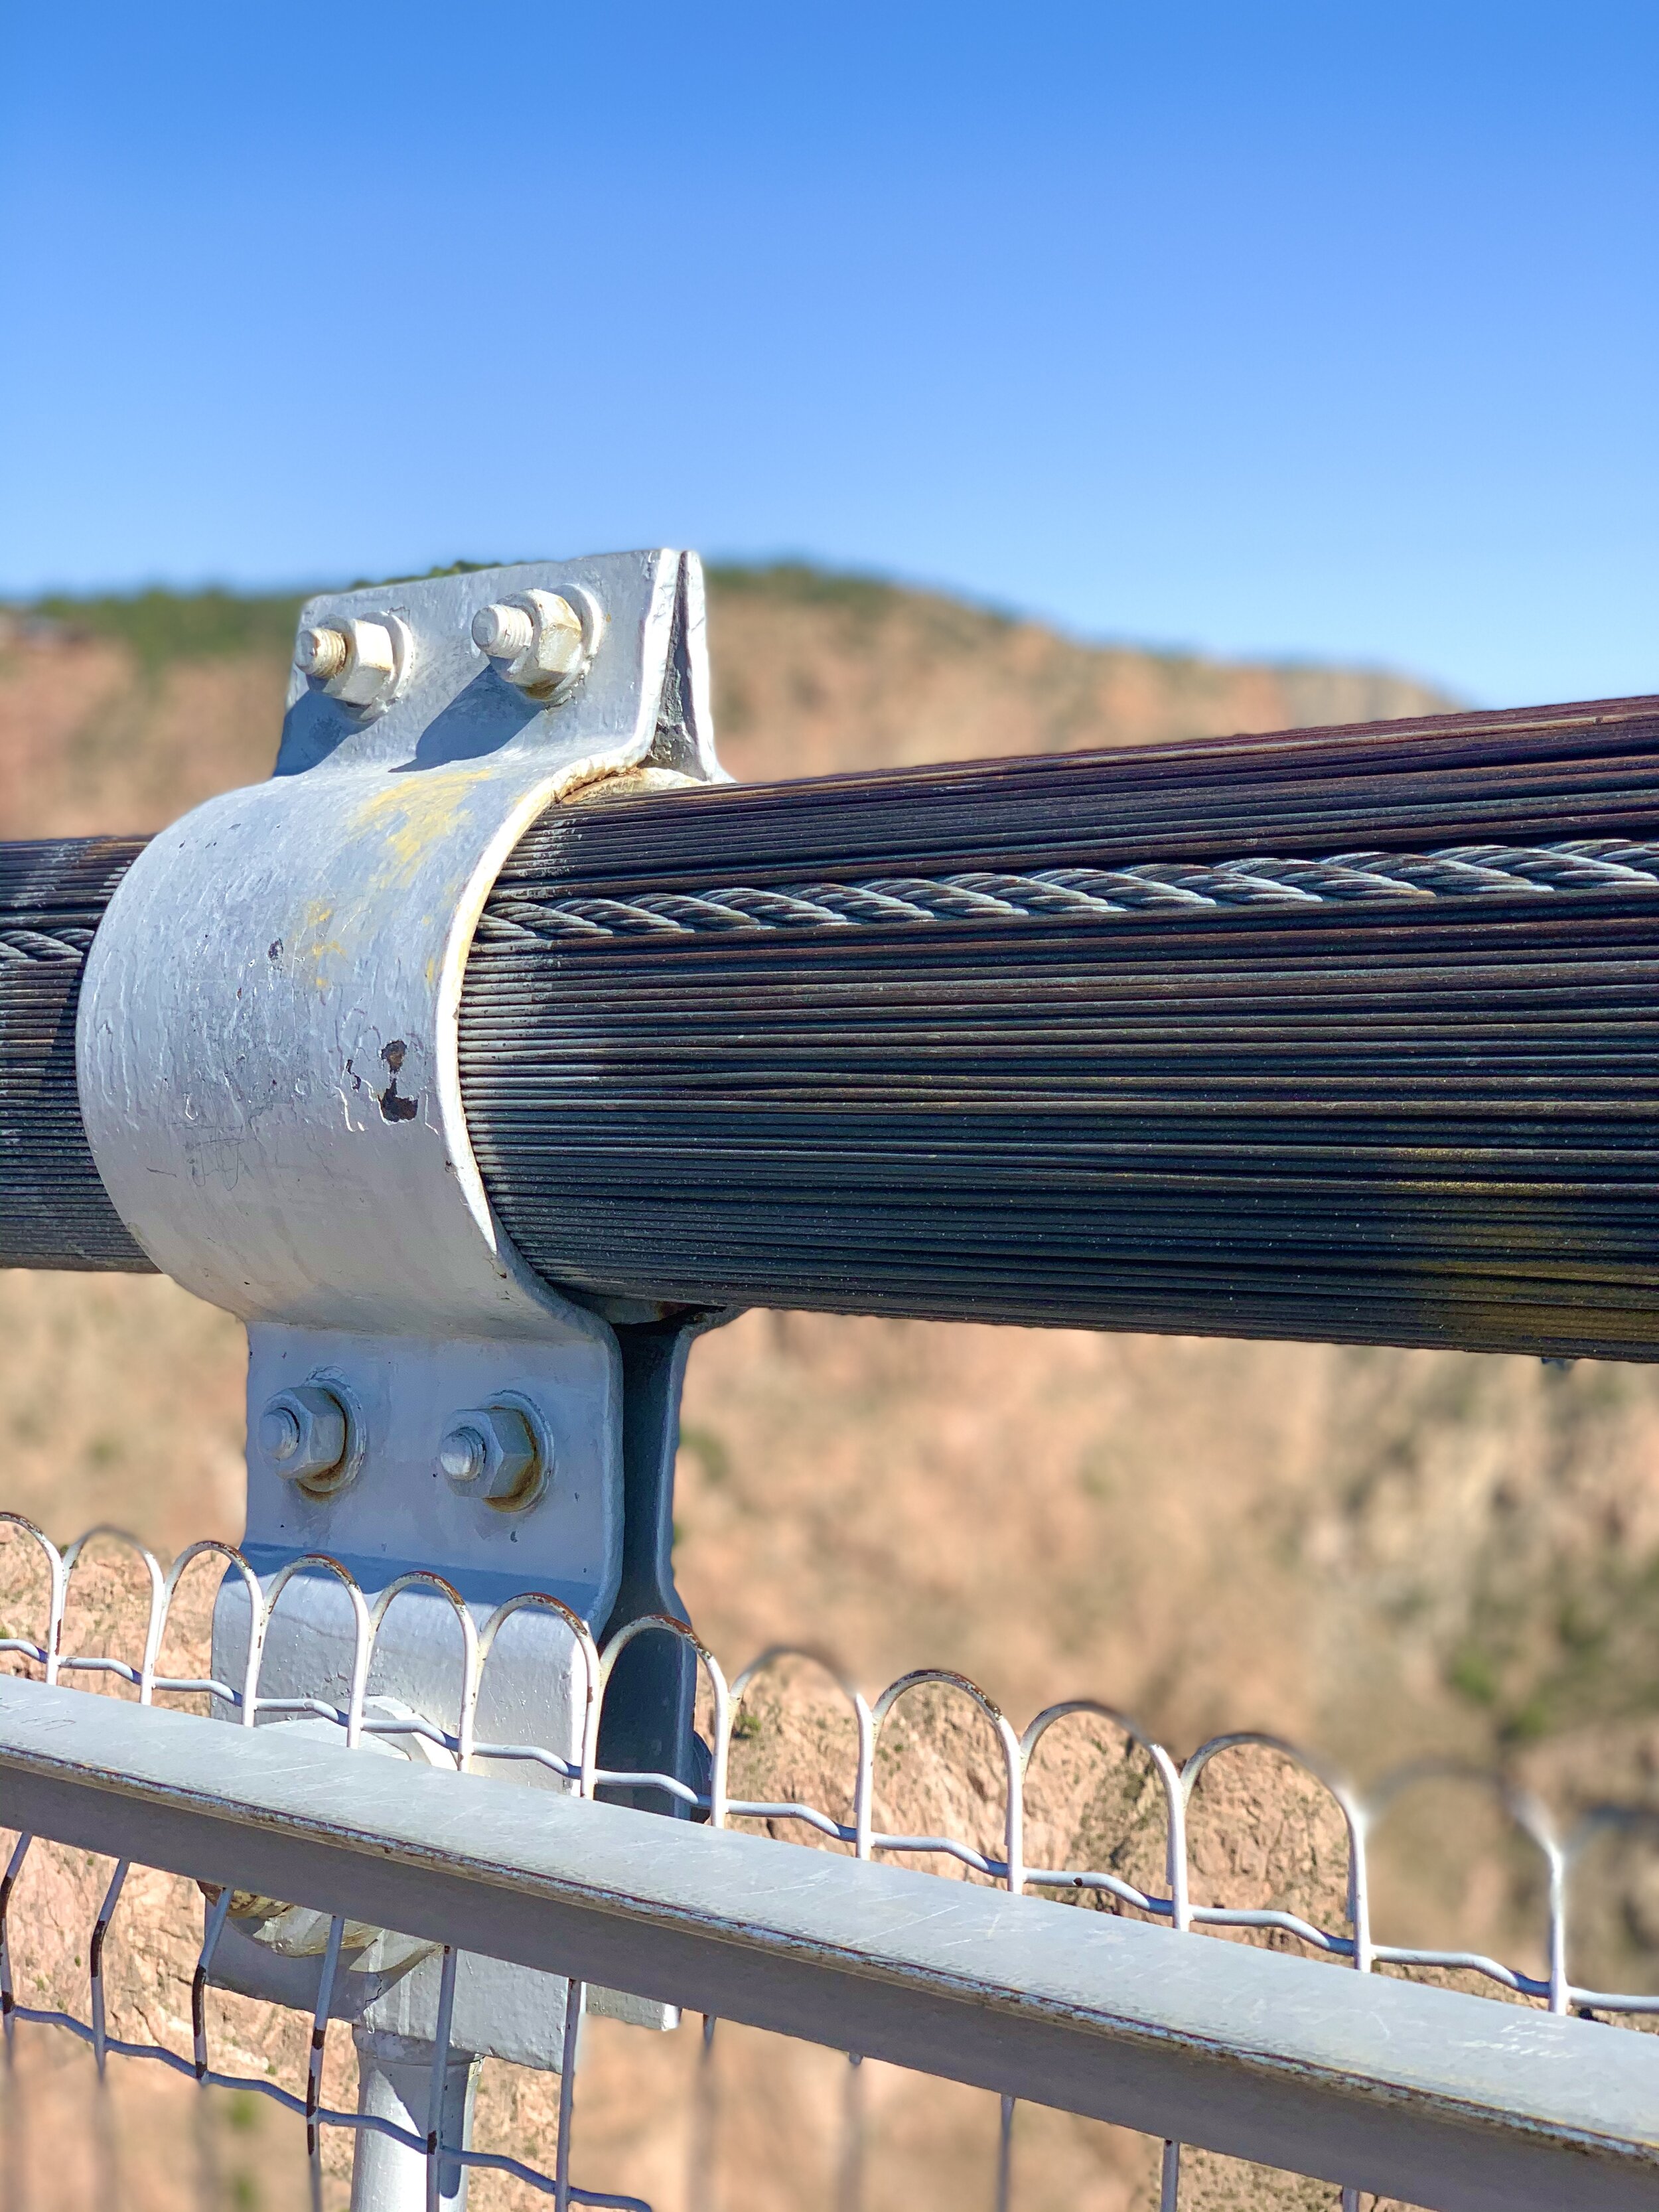  Royal Gorge Bridge is 1,260 feet long and 18’ wide.  There are 2,100 strands of galvanized wire in the 300 tons of cables suspending the bridge, 1,000 tons of steel in the bridge floor, and the weight capacity of the bridge is over 2 million pounds!